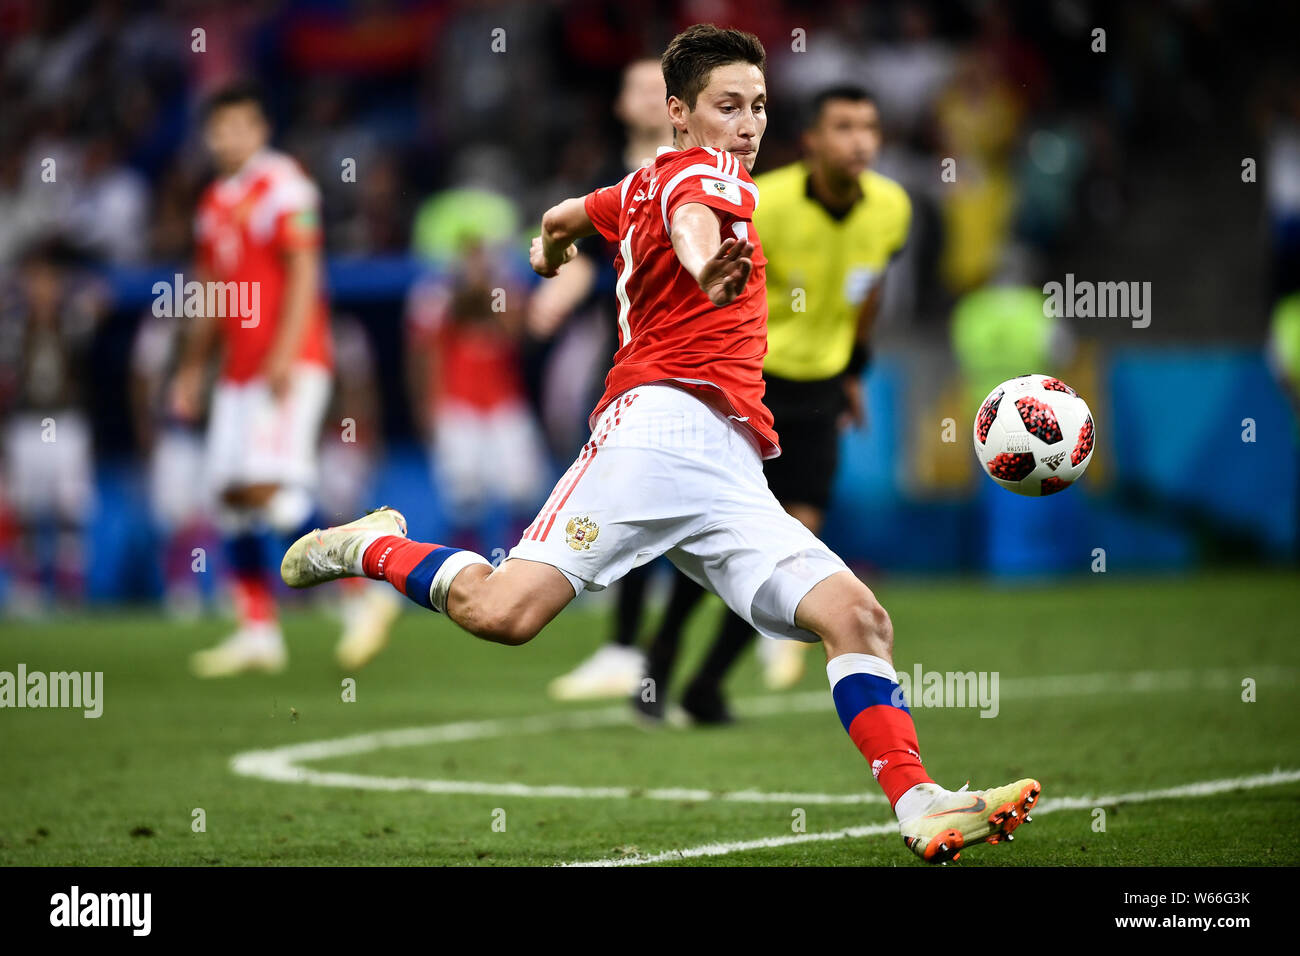 Daler Kuzyayev of Russia kicks the ball to shoot against Croatia in the quarterfinal match during the 2018 FIFA World Cup in Sochi, Russia, 7 July 201 Stock Photo